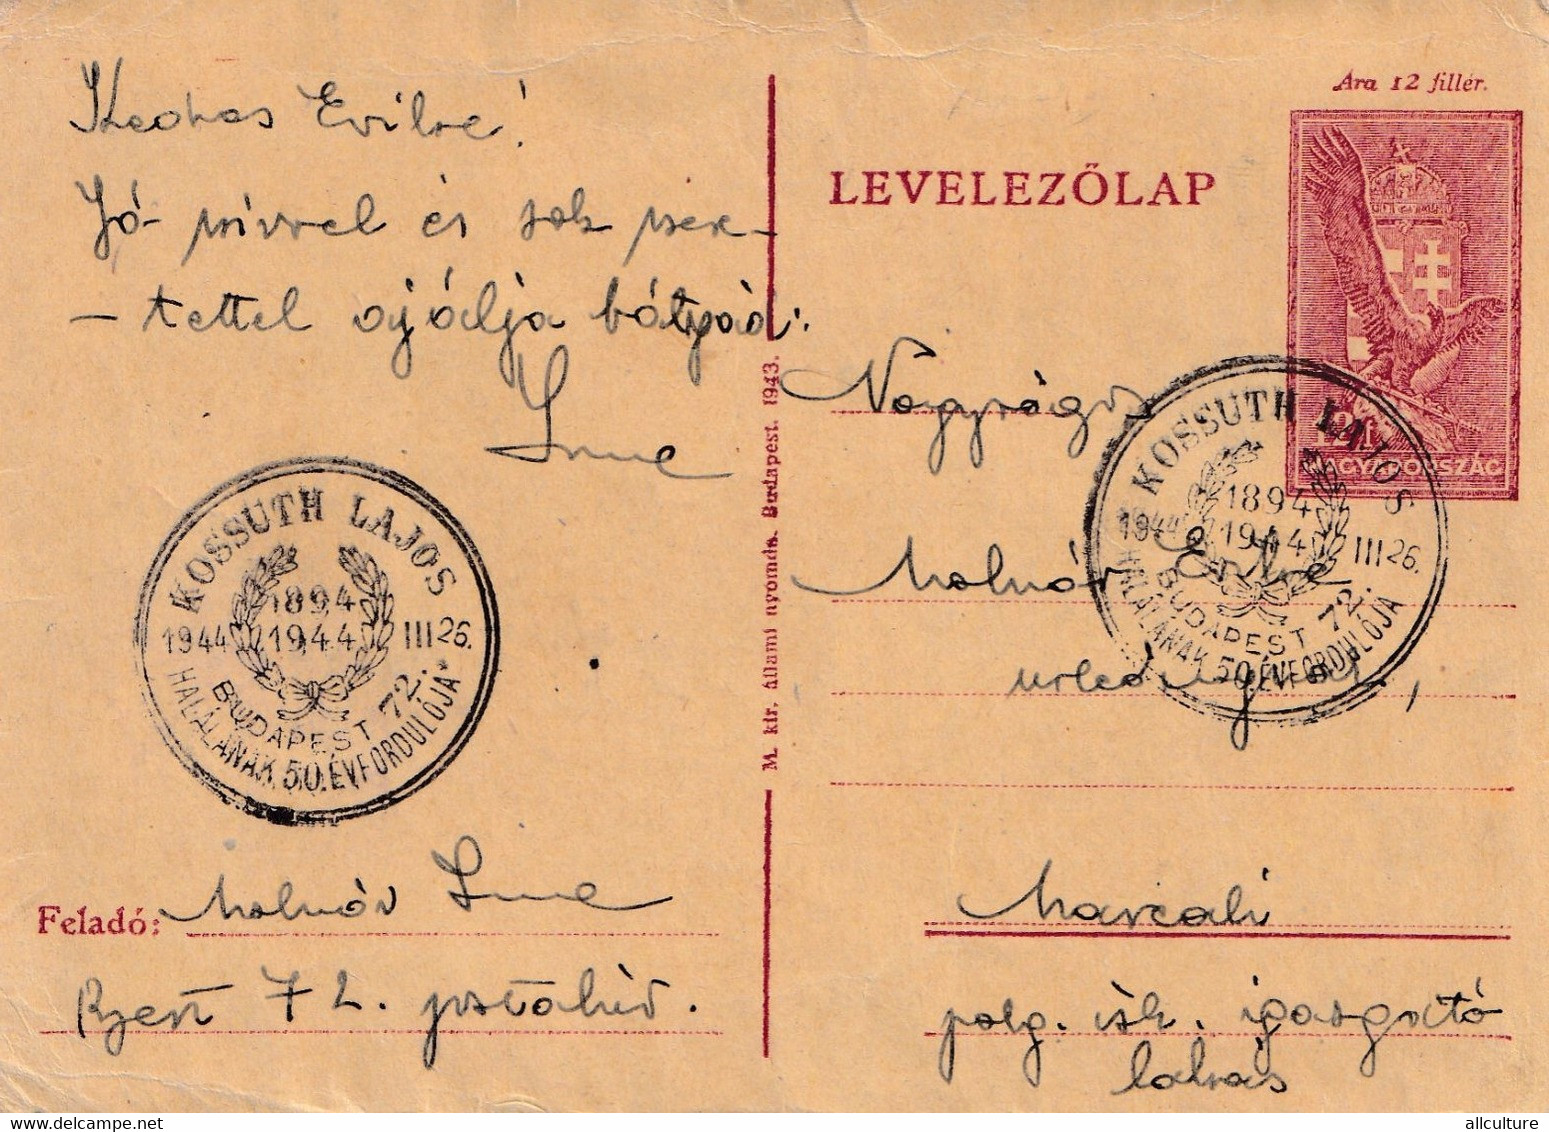 A8702 - 1944 Debrecen Hungary Postcard Cover To Vac Kossuth Lajos Stamp Issue - Entiers Postaux